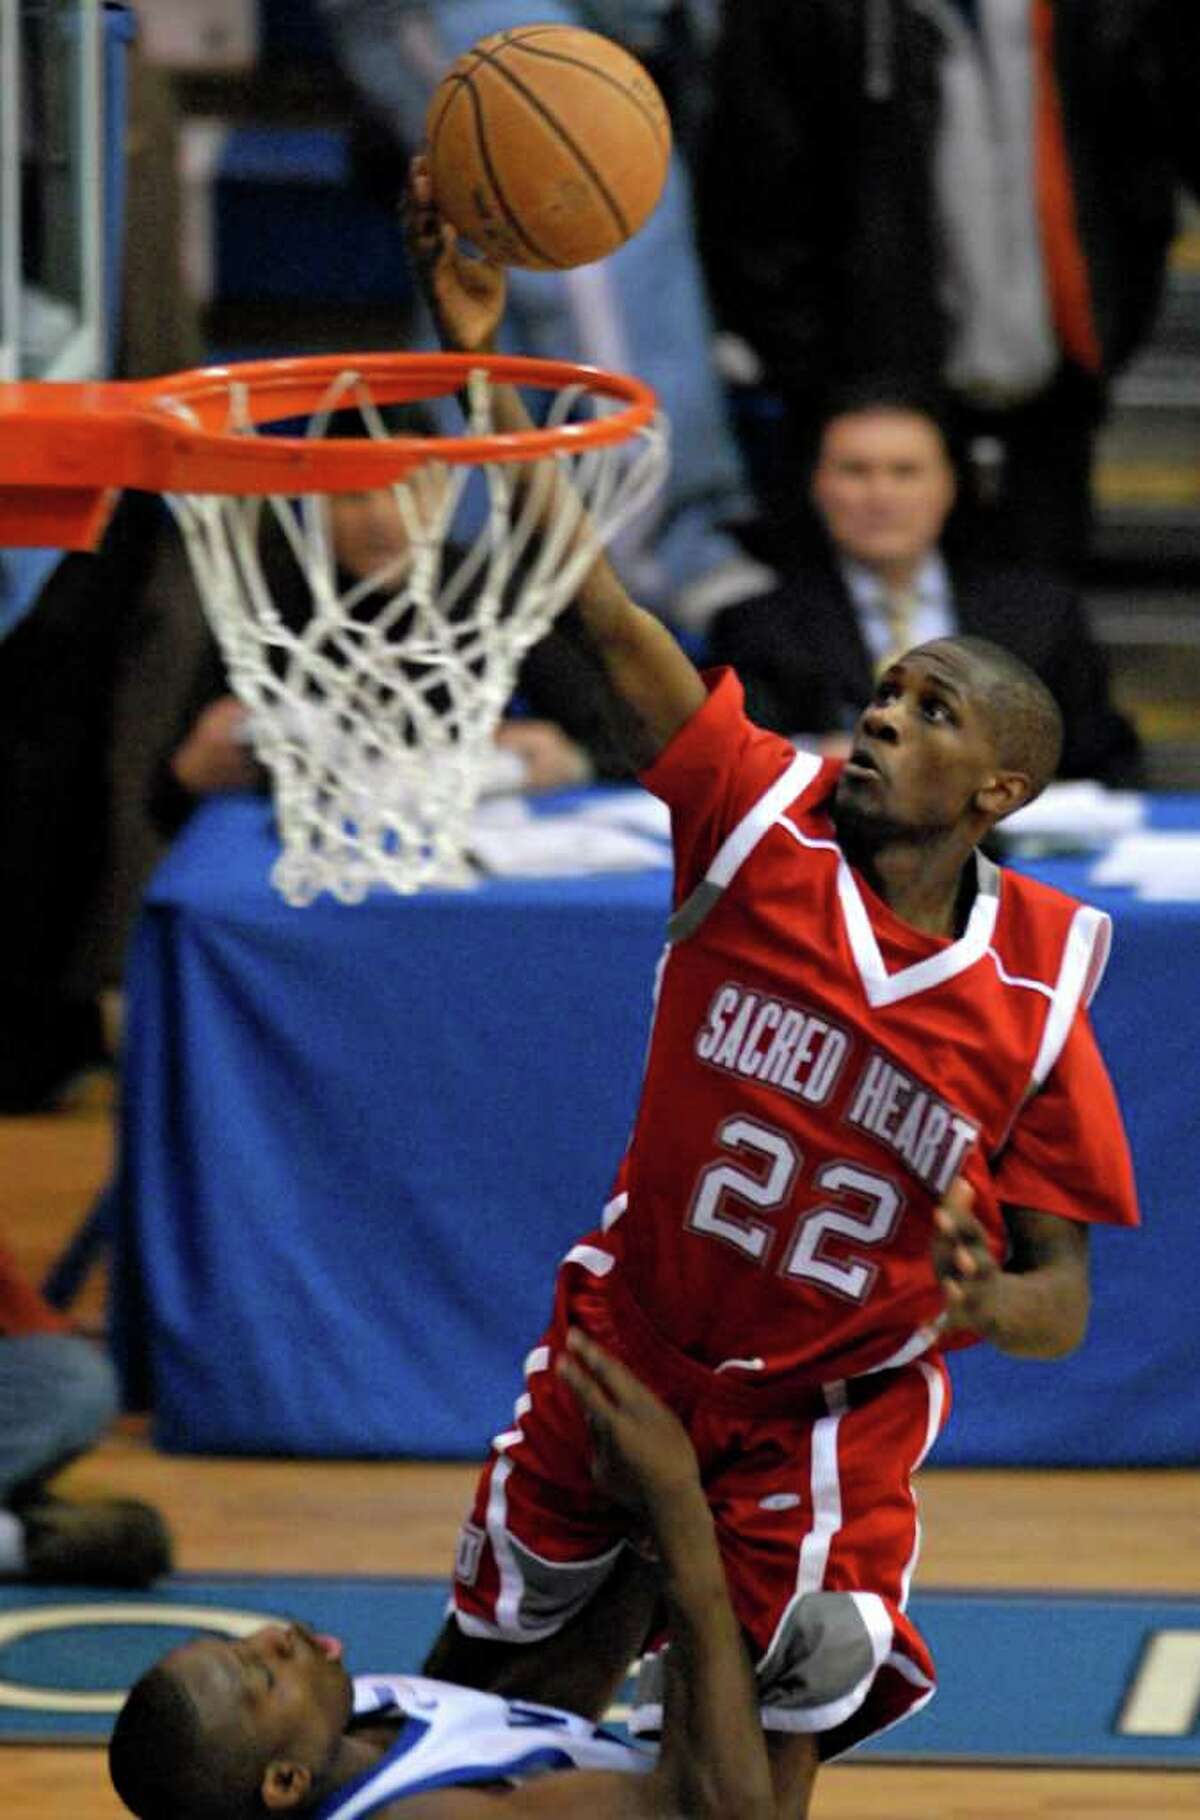 Sacred Heart University's Chauncey Hardy in action against Central Connecticut State University in the NEC Championship game March 7th, 2007. Hardy died Saturday, Oct. 8th, 2011 after repeated blows to the head after an incident at a Romanian bar. Hardy played for CSS Giurgiu in southern Romania and was celebrating a victory over rival Dinamo Bucharest in Giurgiu.